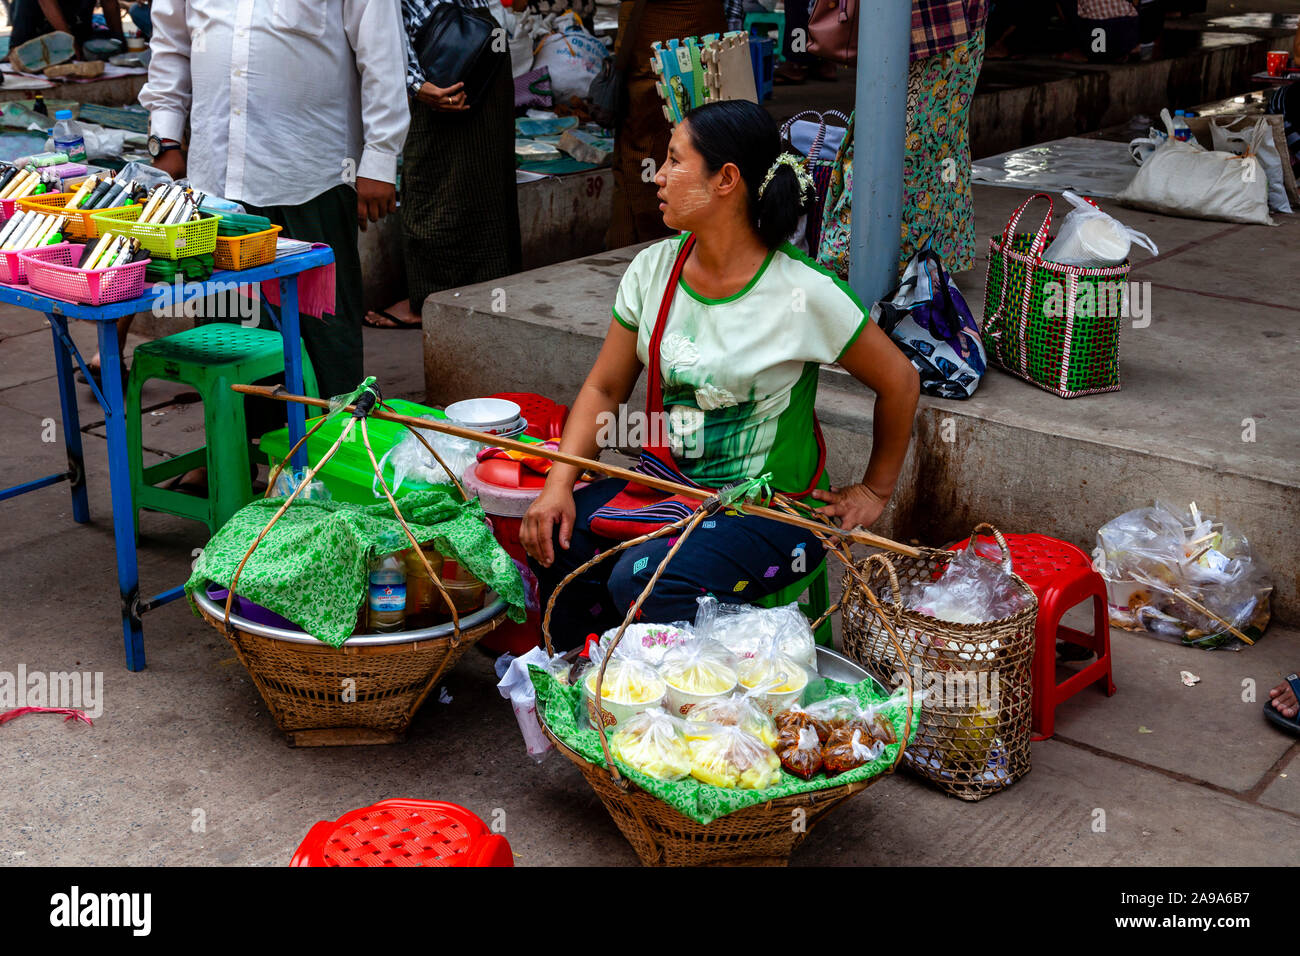 A Local Woman Selling Snacks At The Jade Market, Mandalay, Myanmar Stock  Photo - Alamy